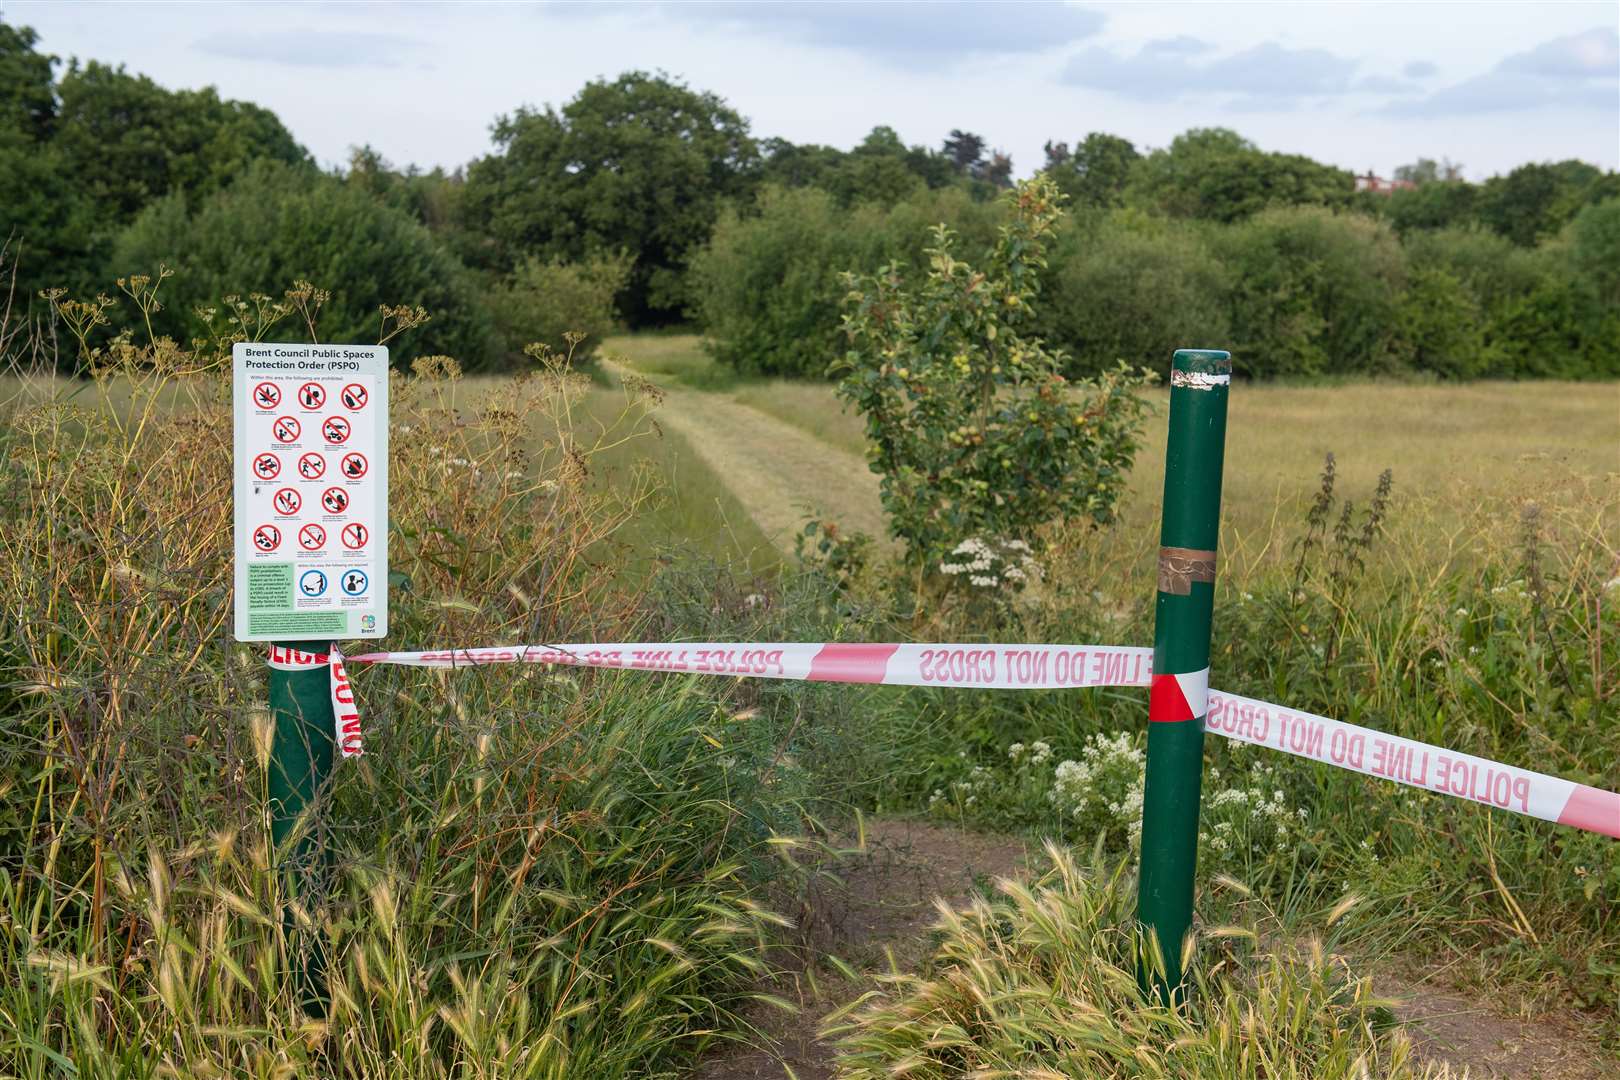 A police cordon at an entrance to Fryent Country Park, in Wembley, where Bibaa Henry and Nicole Smallman were murdered (Dominic Lipinski/PA)